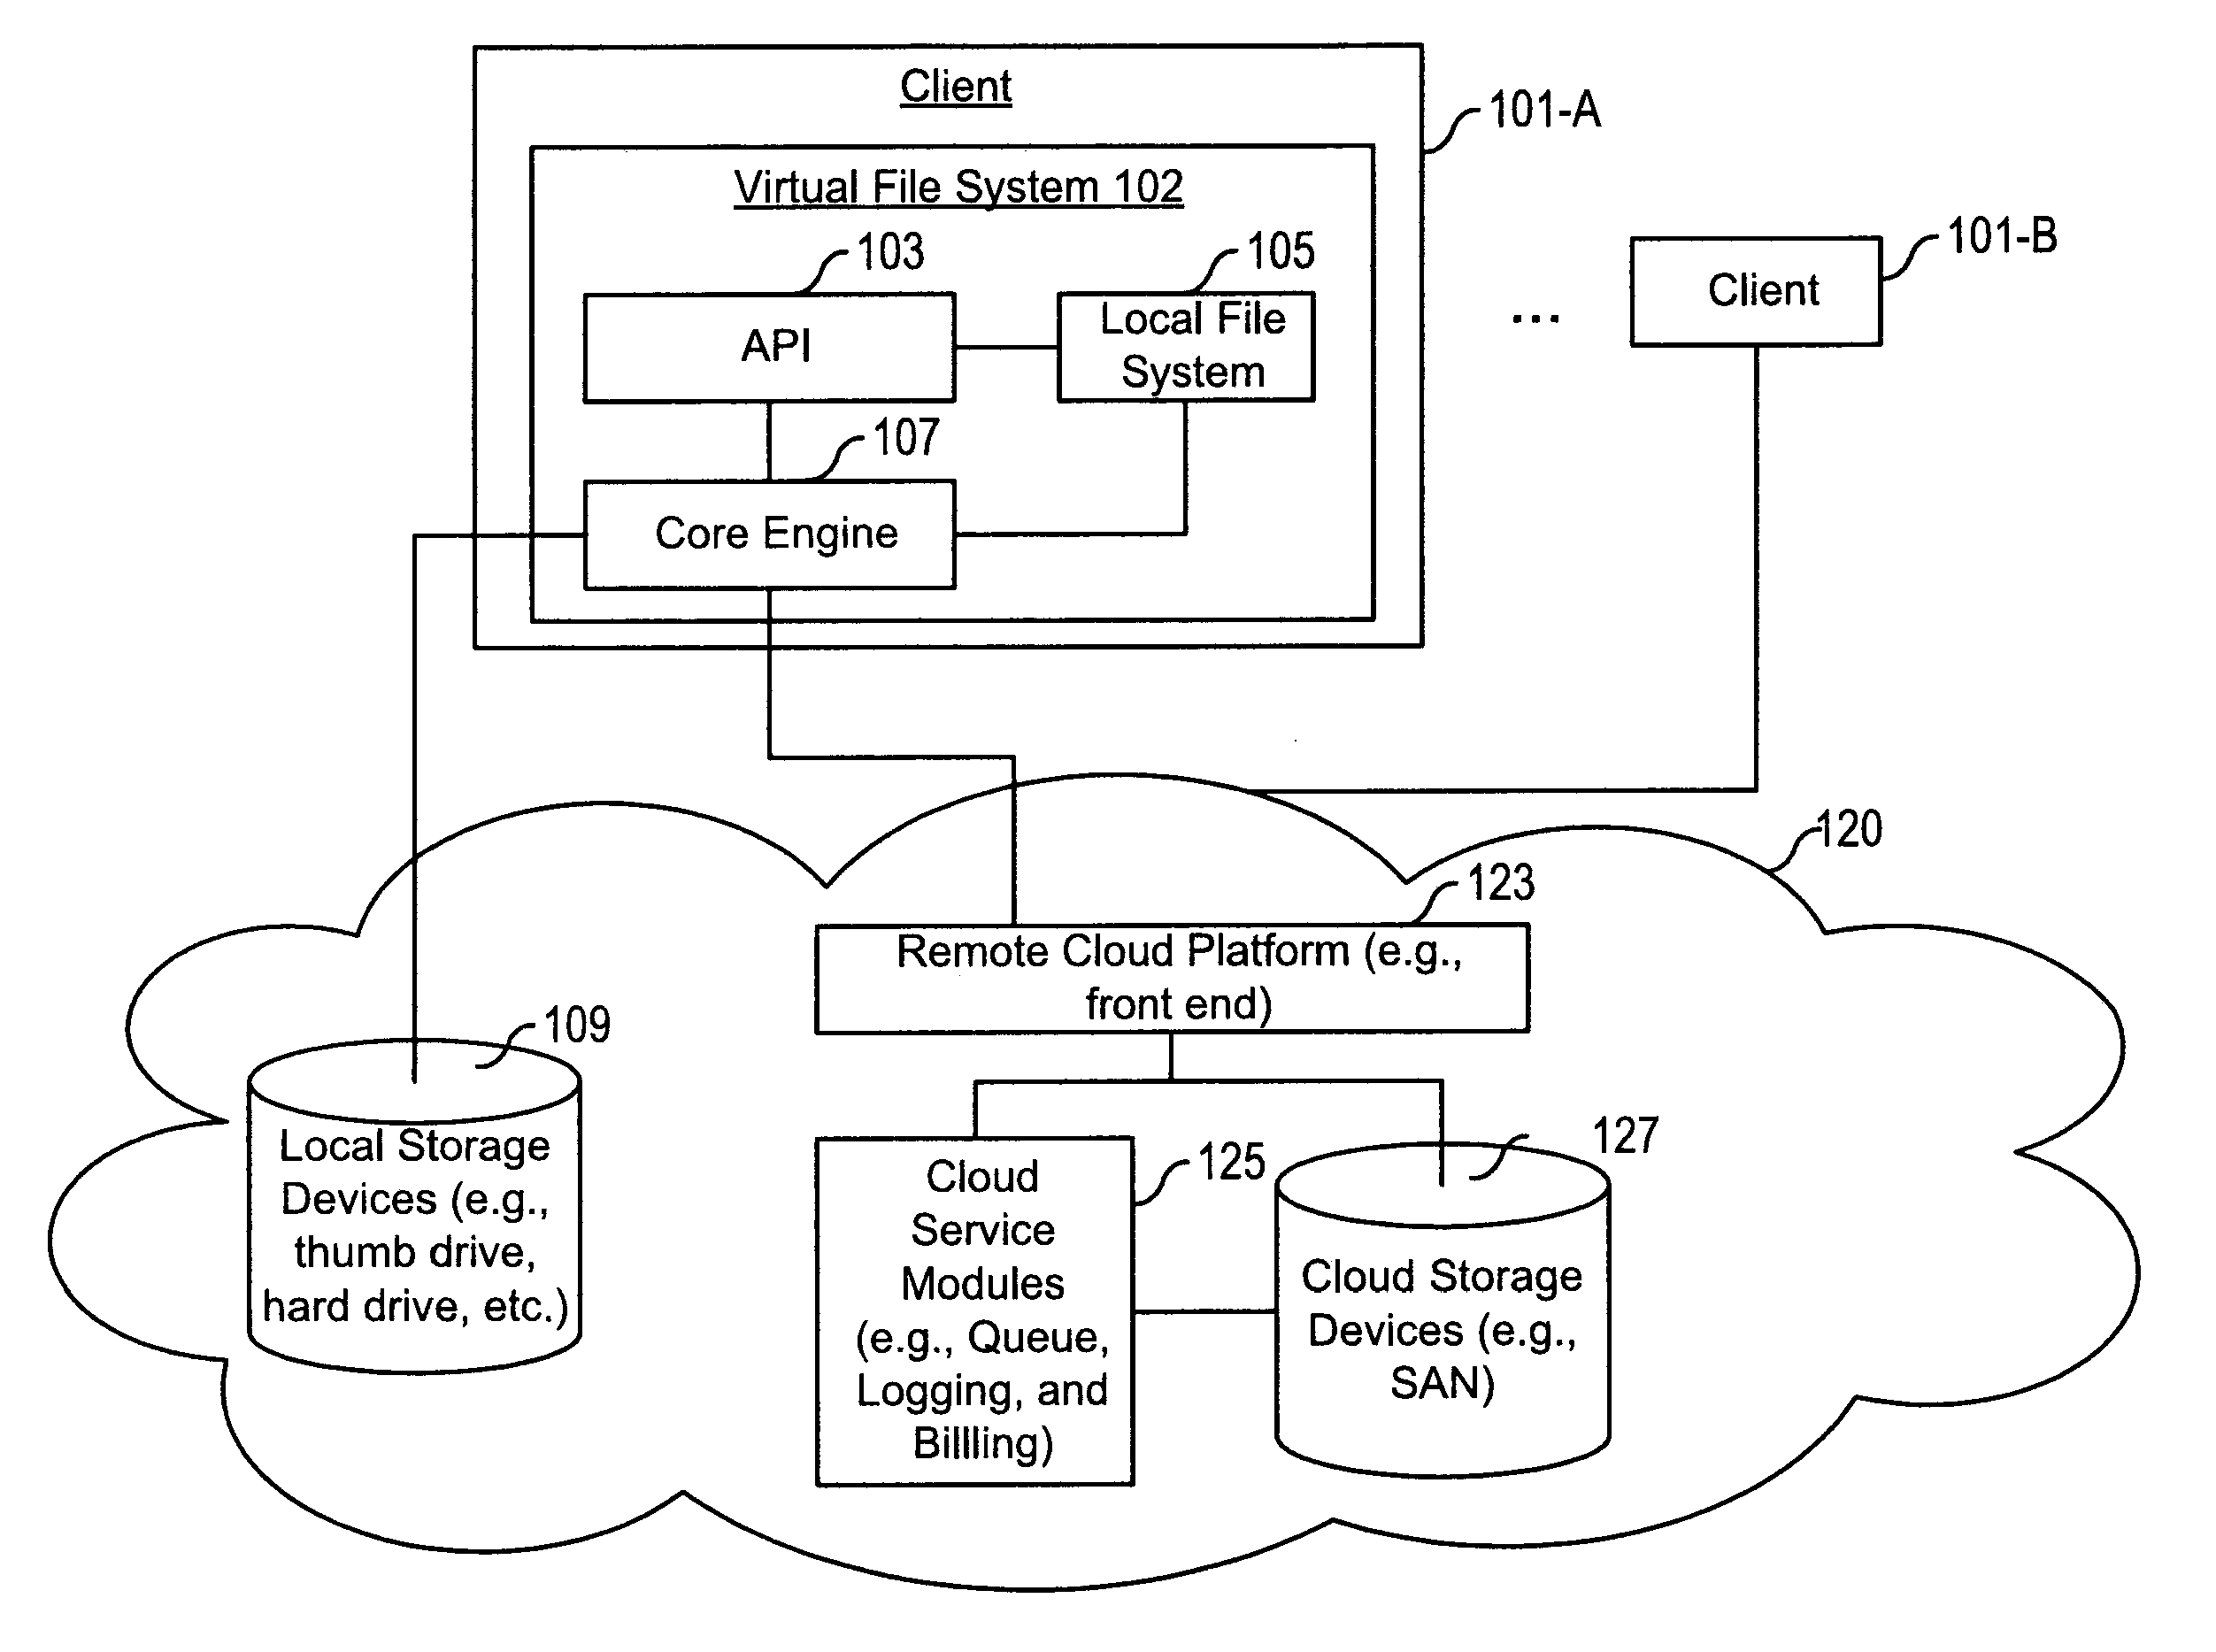 Method and System for Forming a Virtual File System at a Computing Device